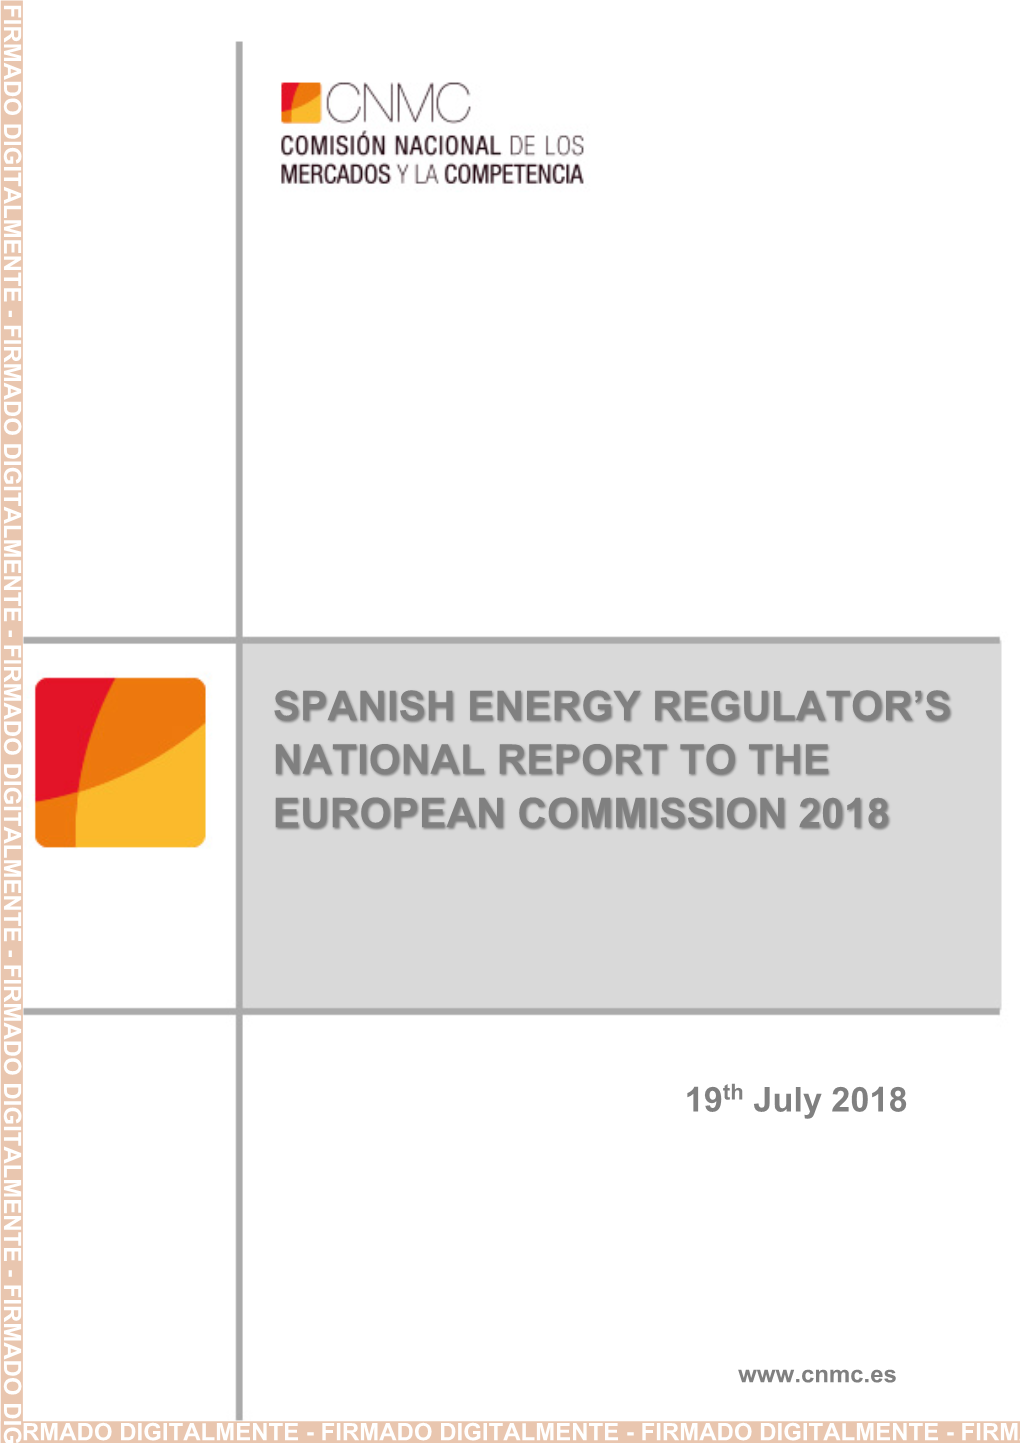 Spanish Energy Regulator's National Report to the European Commission